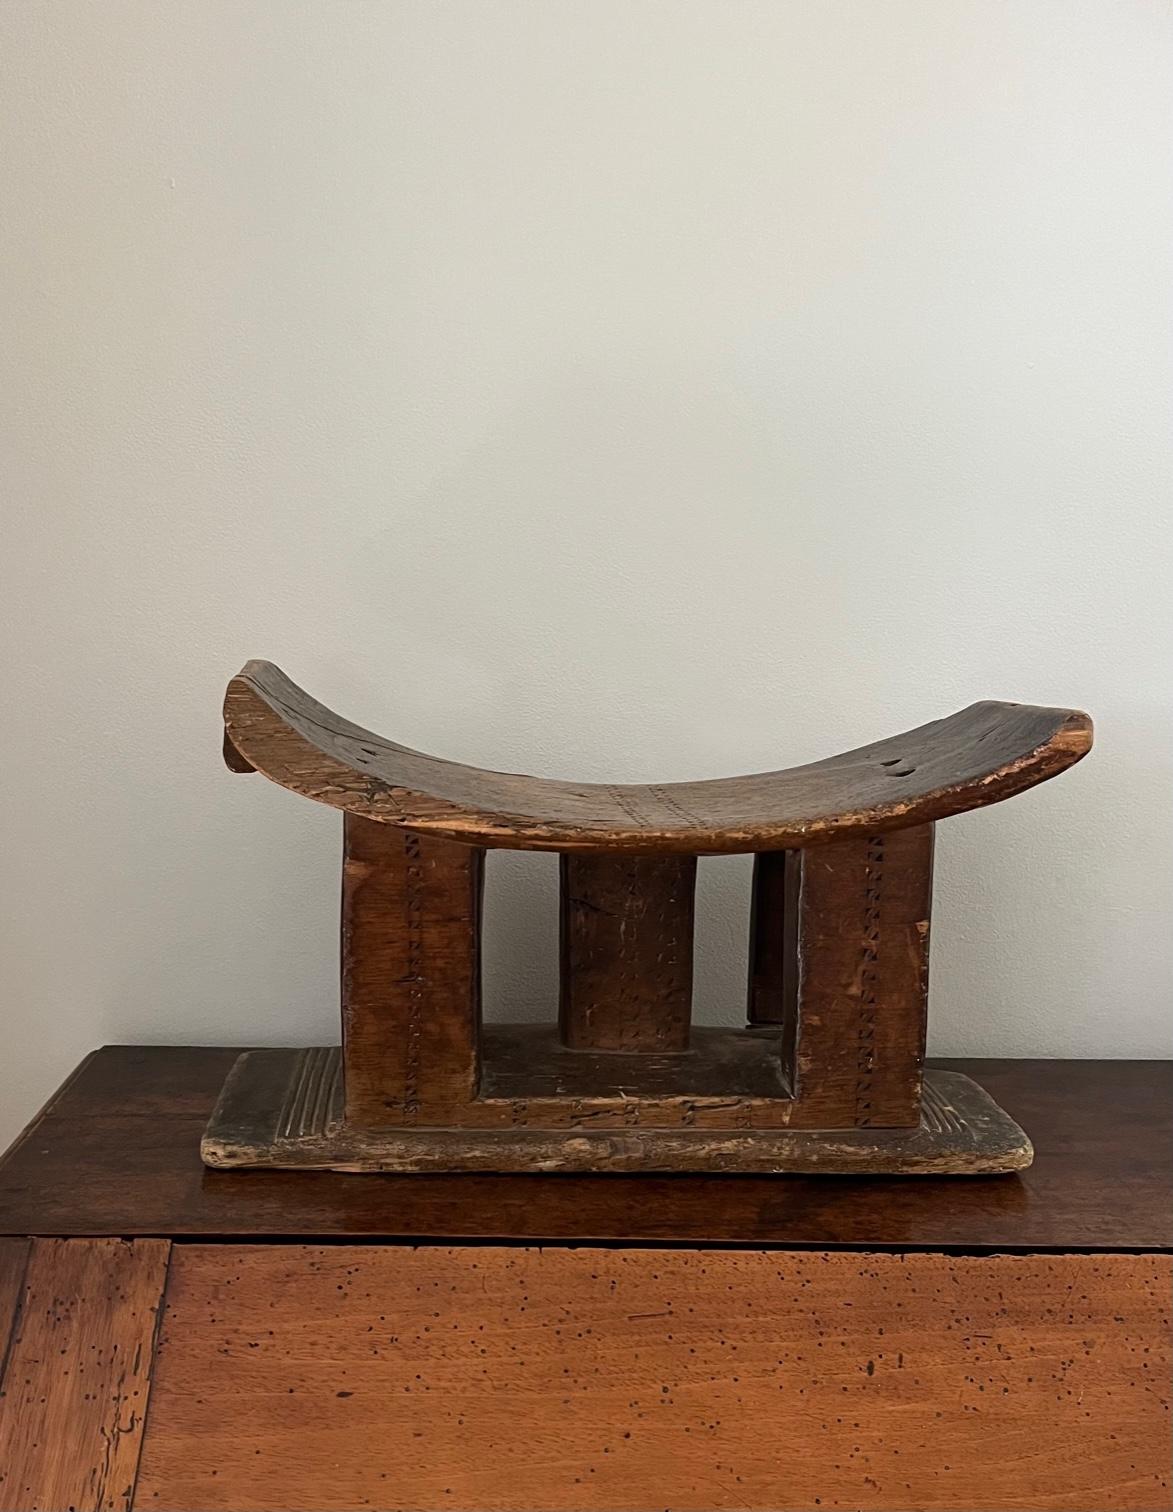 A midcentury African tribal stool. Ashanti tribe, Ghana. A wonderful genuine tribal stool which has evidently been used and not made for the tourist trade. A great decorative object.